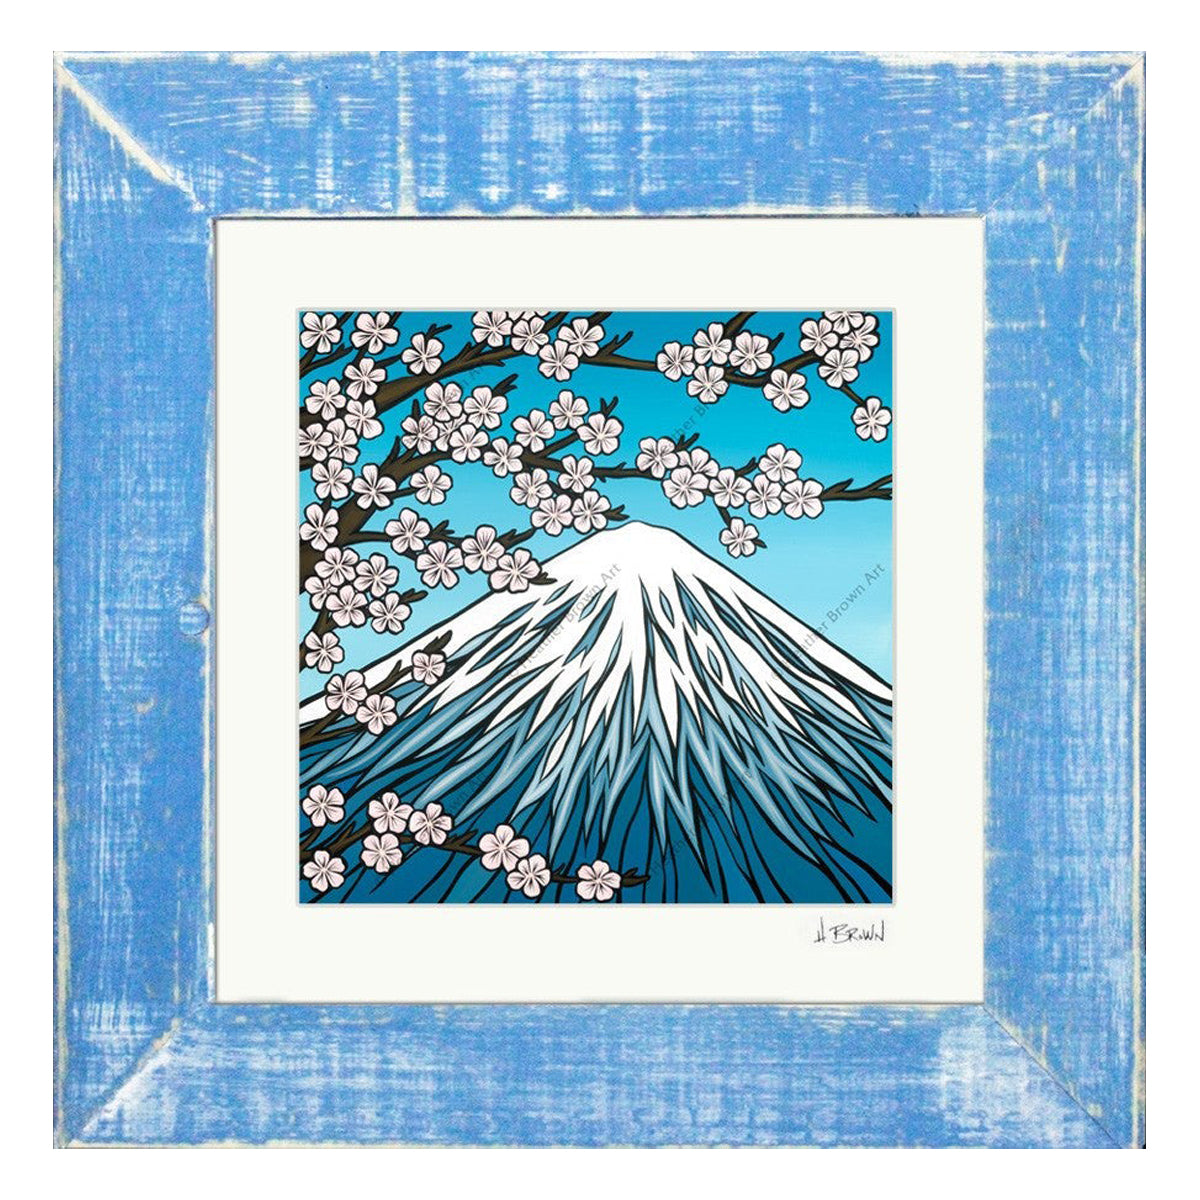 Mt. Fuji - Matted Print on Paper with Classic Blue, Reclaimed Wood Frame by Hawaii surf artist Heather Brown